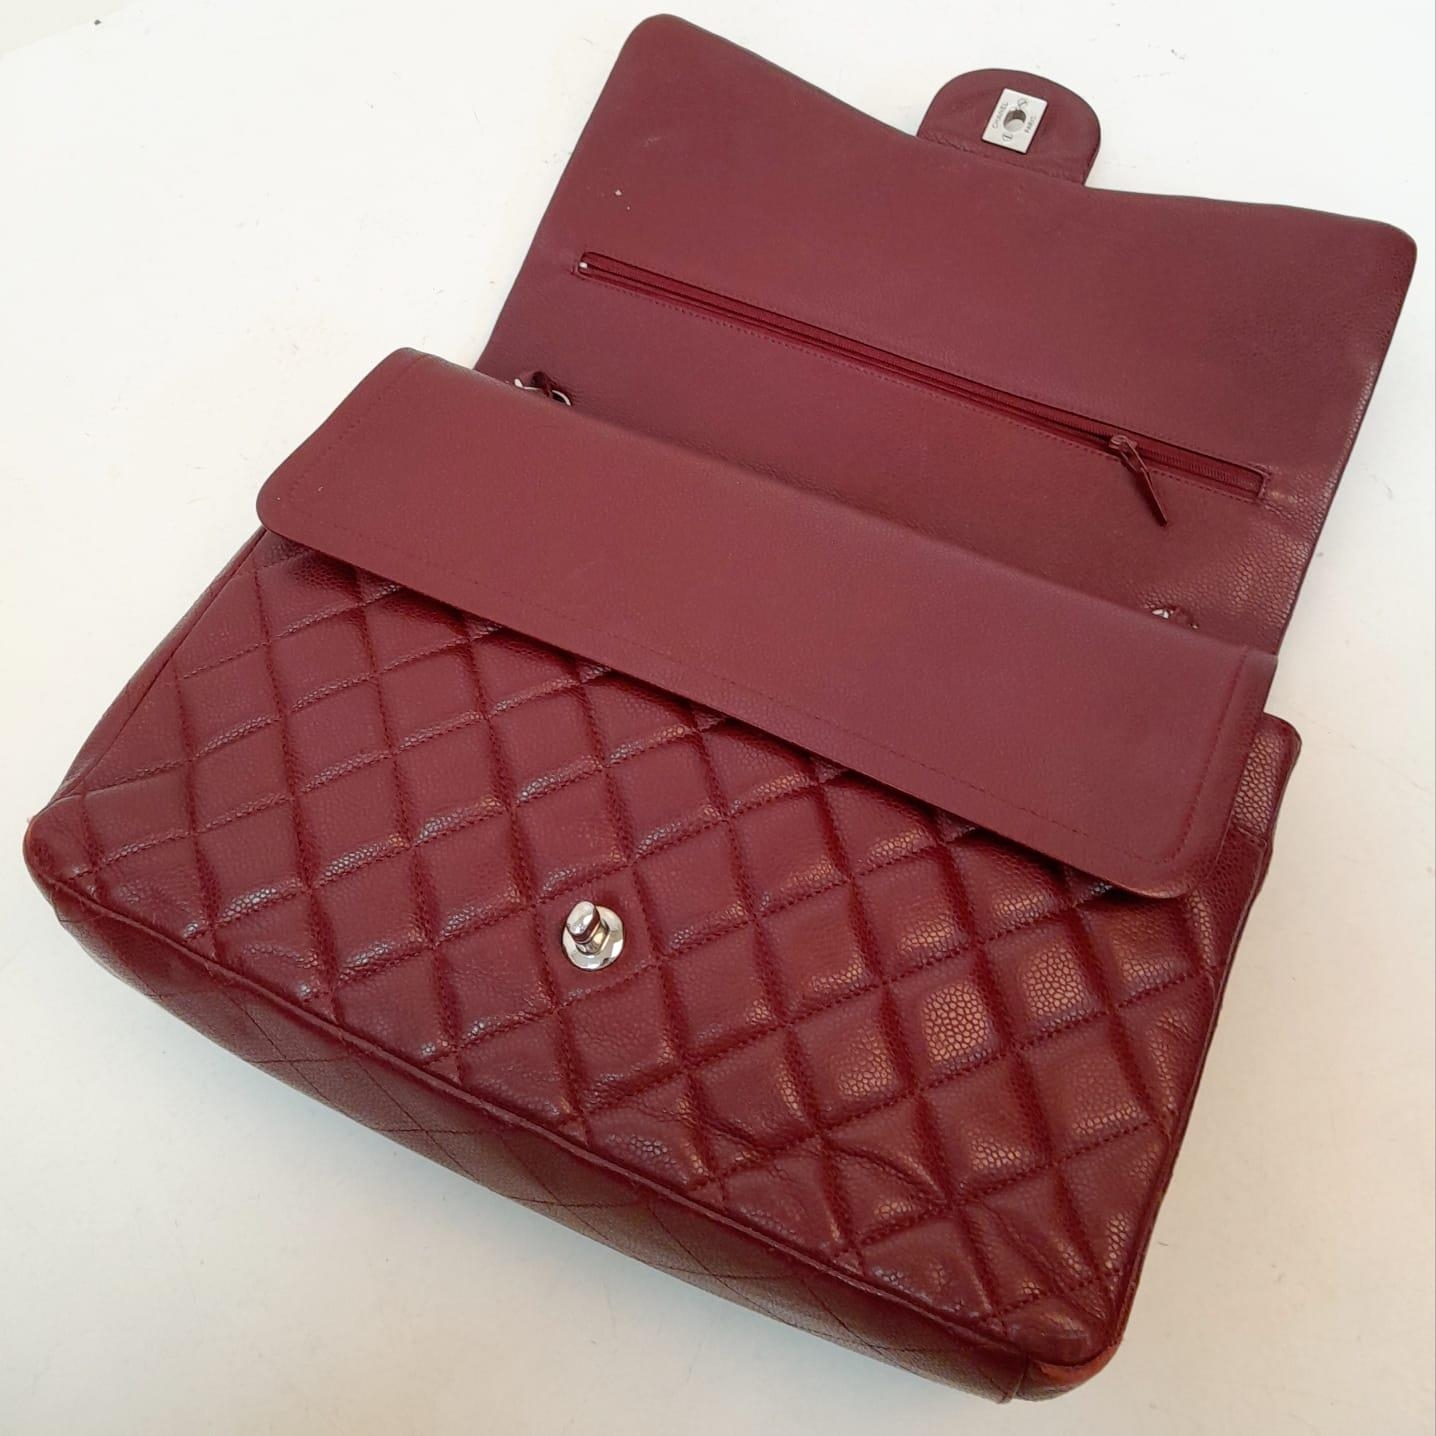 A Chanel Burgundy Jumbo Classic Double Flap Bag. Quilted leather exterior with silver-toned - Image 13 of 16